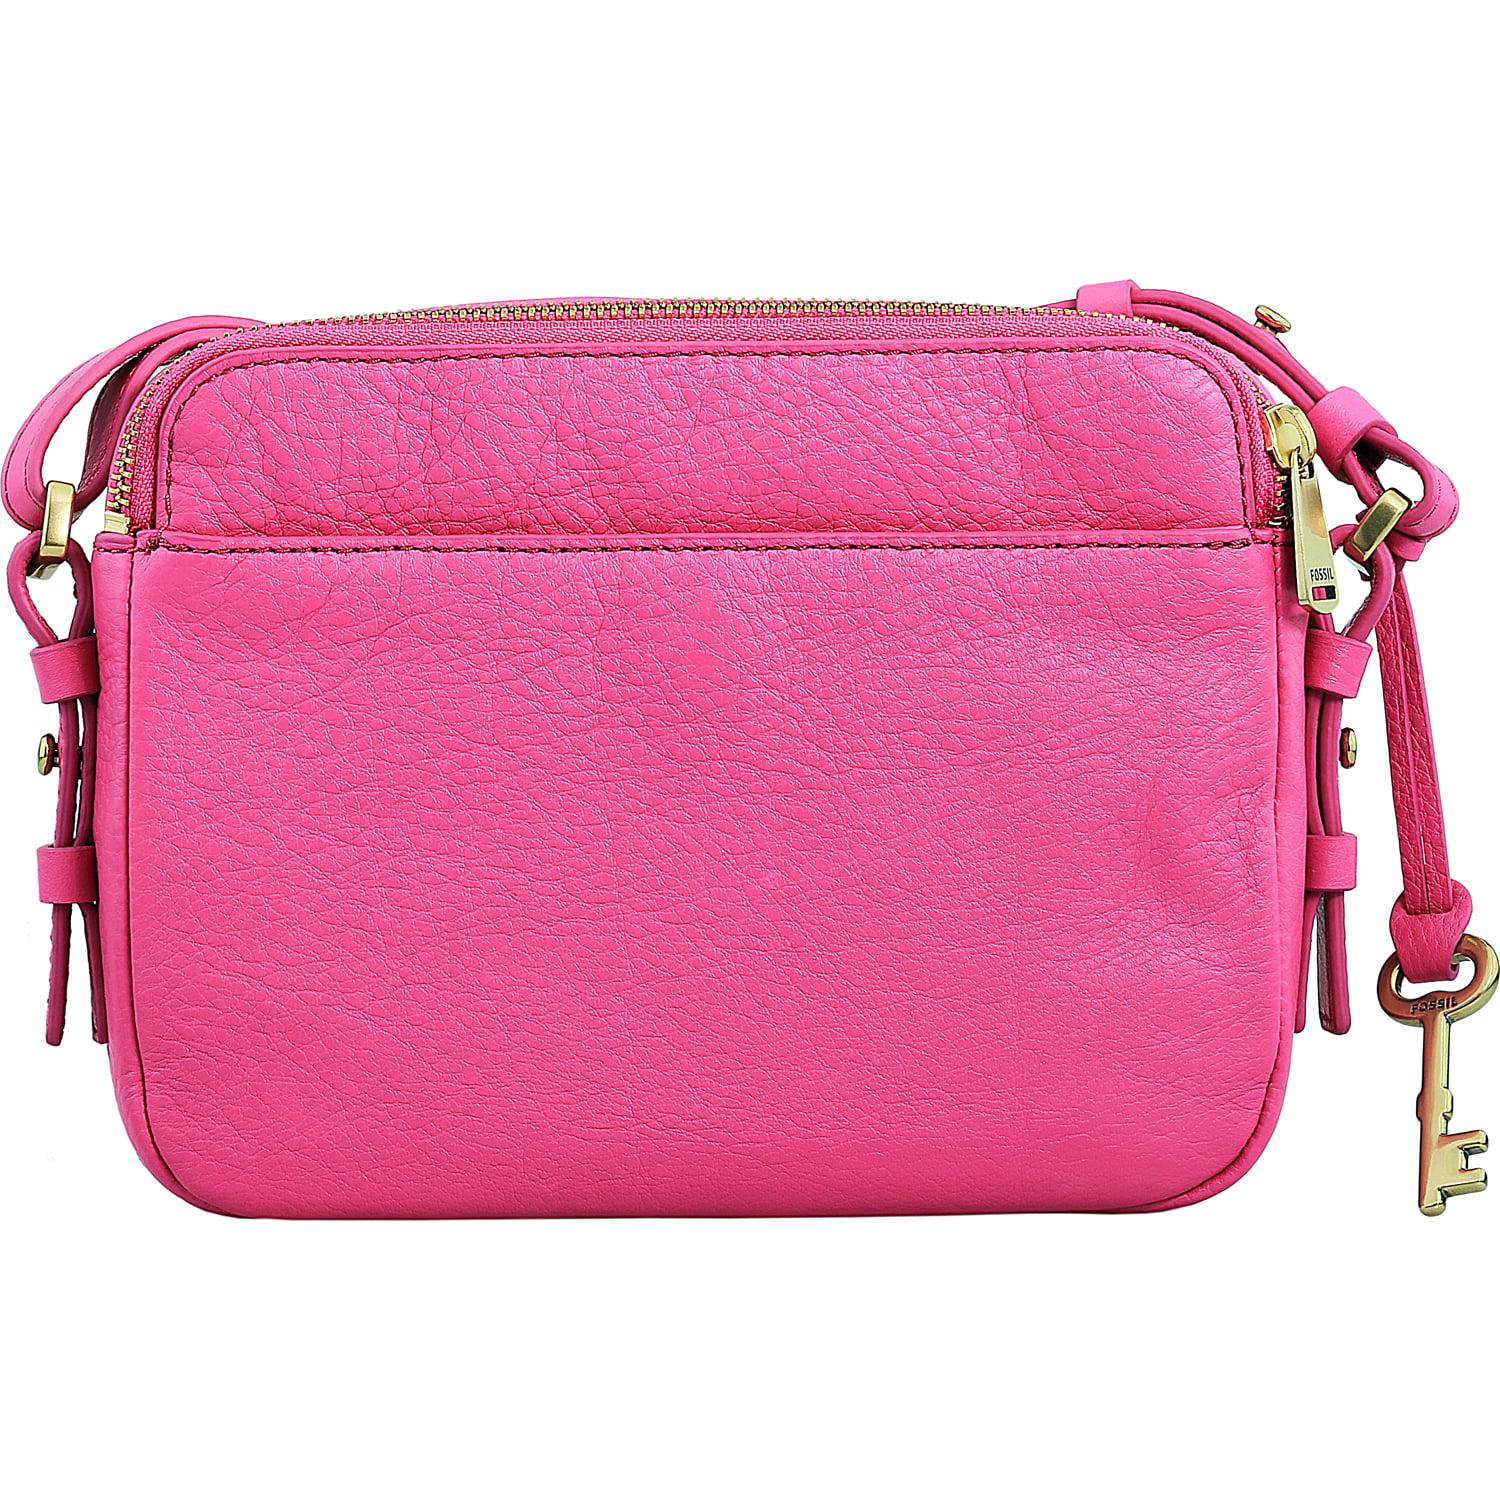 Fossil Women&#39;s Piper Toaster Leather Crossbody Leather Cross Body Bag Baguette - Hot Pink ...